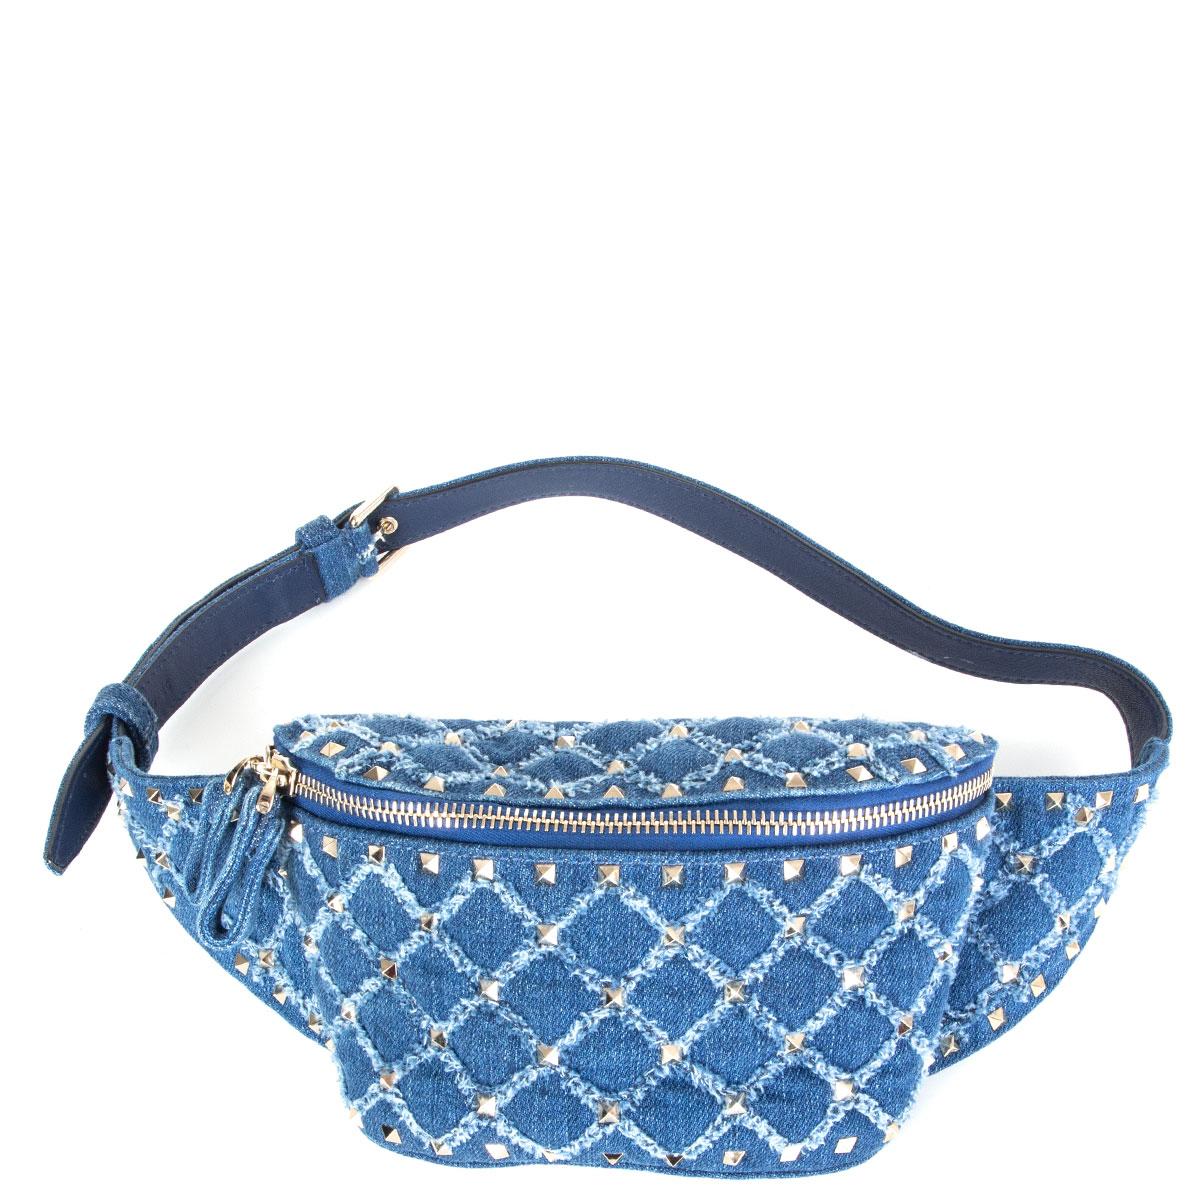 100% authentic Valentino Rockstud denim belt bag in indigo blue quilted cotton with signature light gold-tone pyramid studs. Opens with a double zipper and is lined in blue denim with a red calfskin zipper pocket. Has been carried and is in